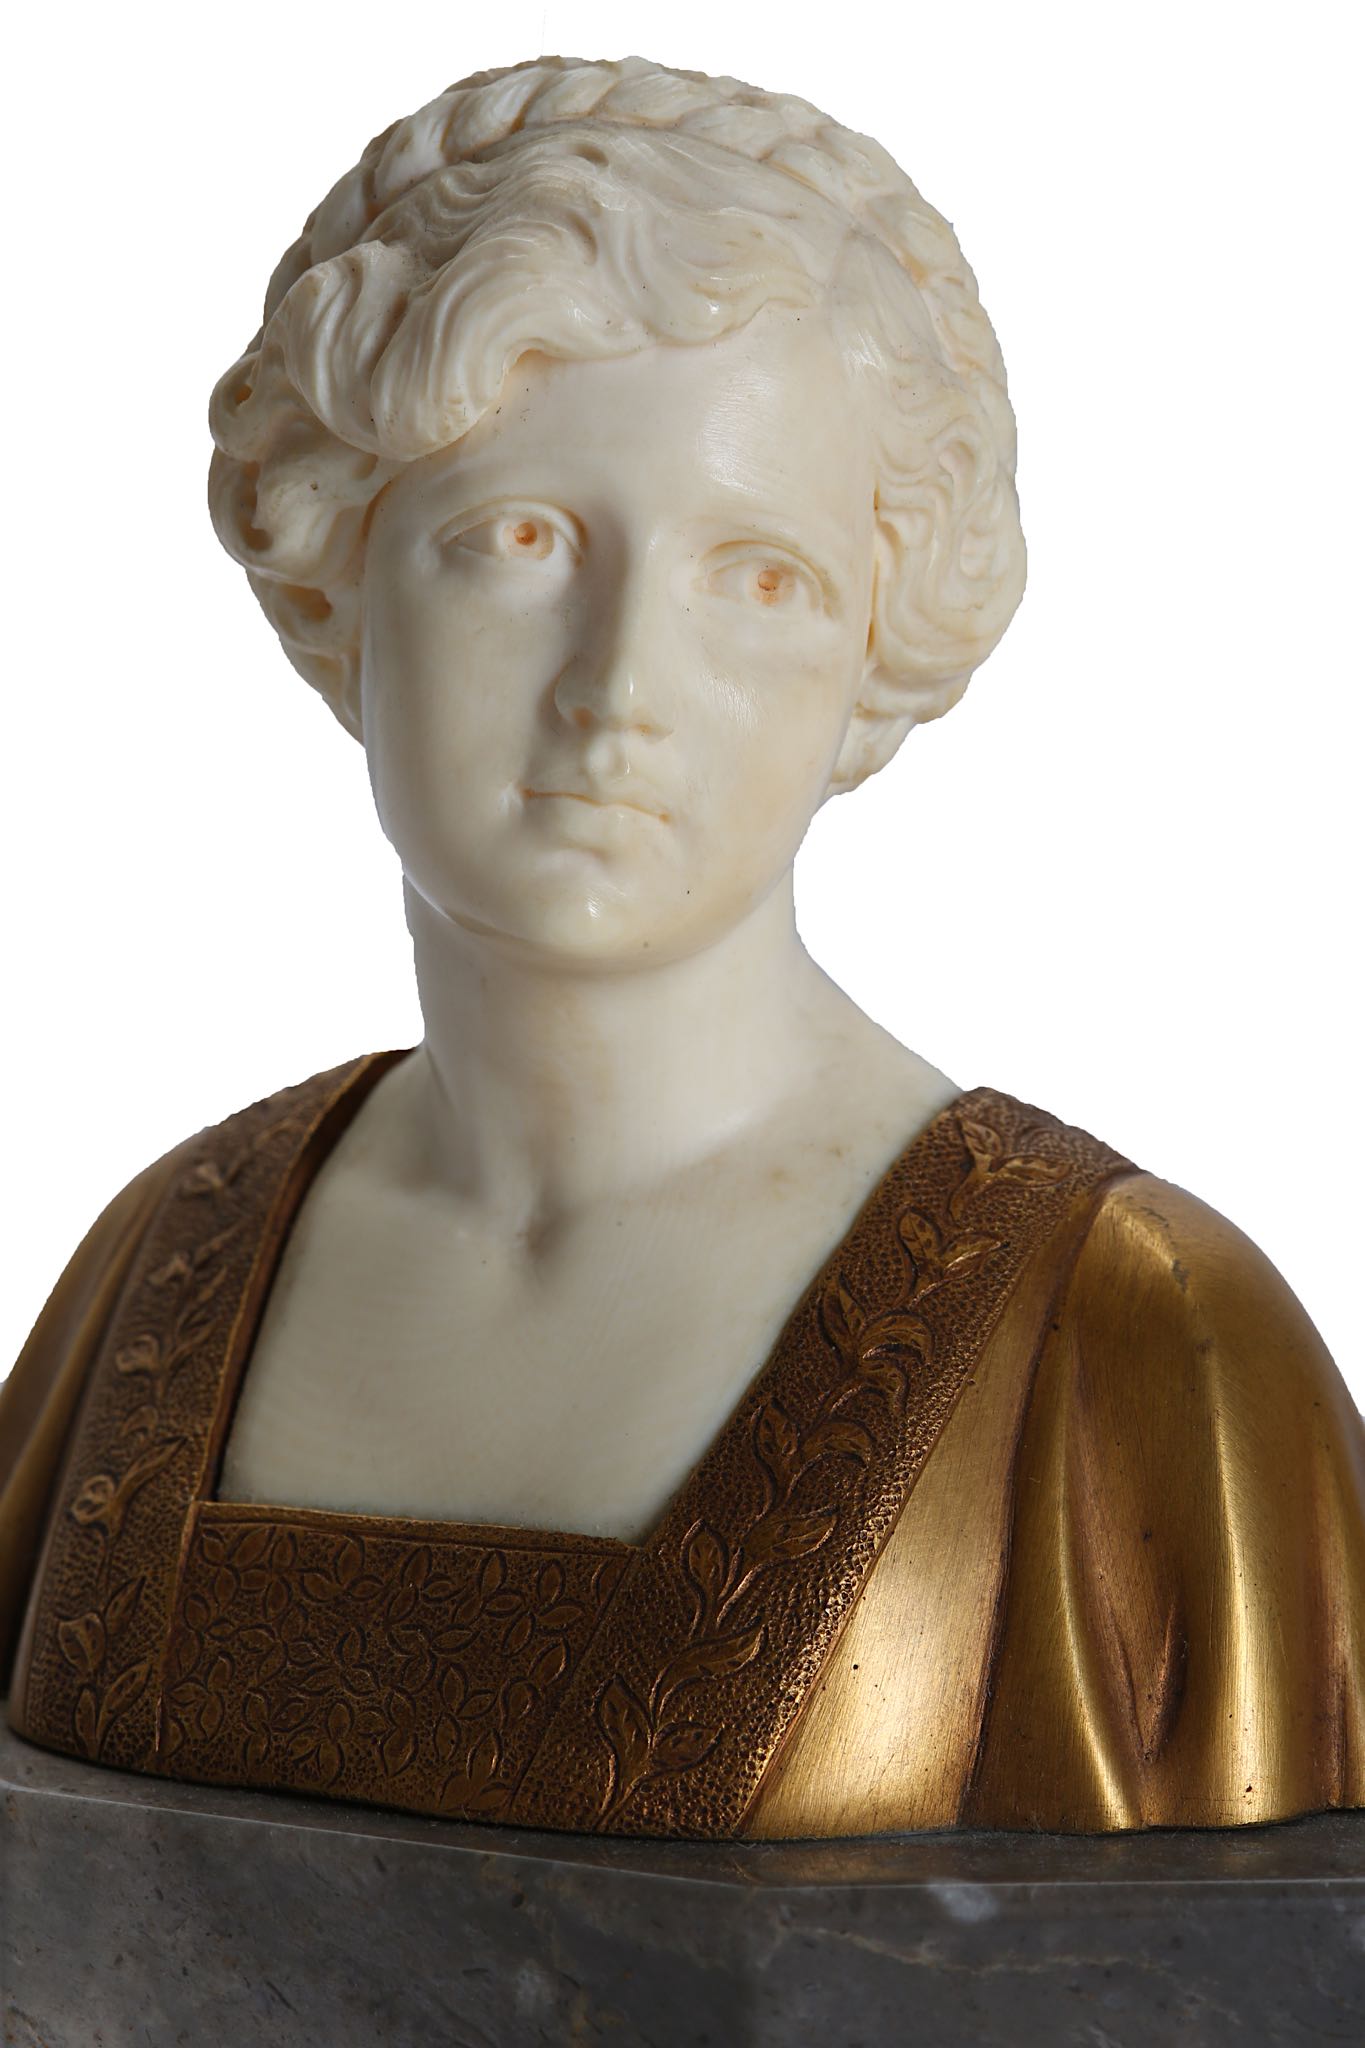 FERDINAND PREISS (GERMAN 1892-1943): AN IVORY AND GILT BRONZE BUST OF A GIRL  the young beauty - Image 7 of 8